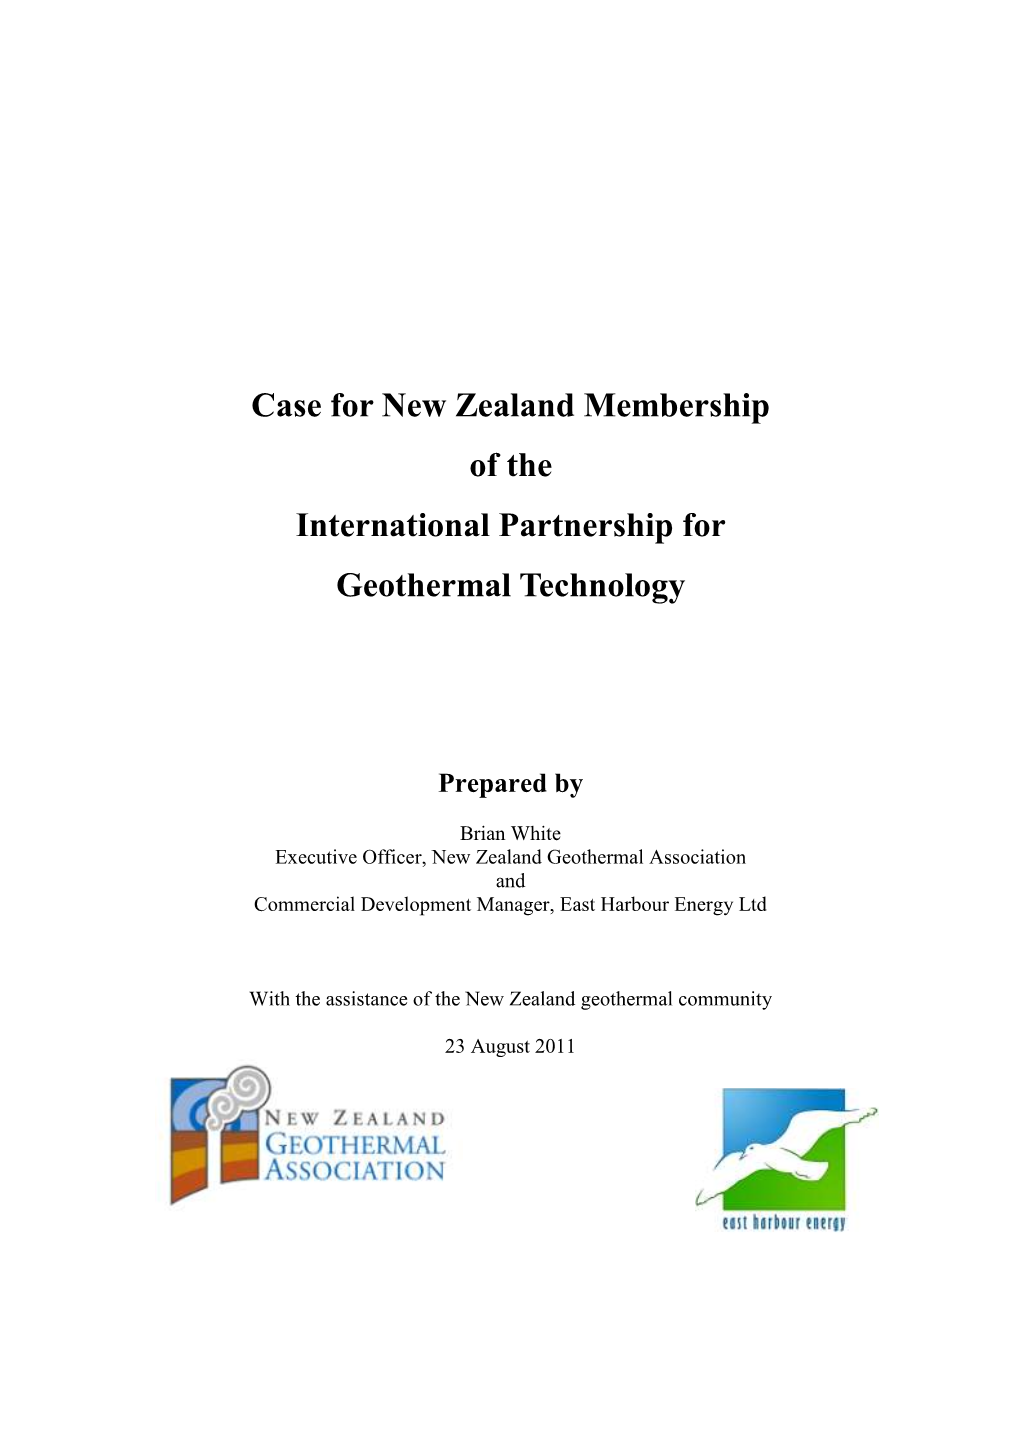 Case for New Zealand Membership of the International Partnership for Geothermal Technology